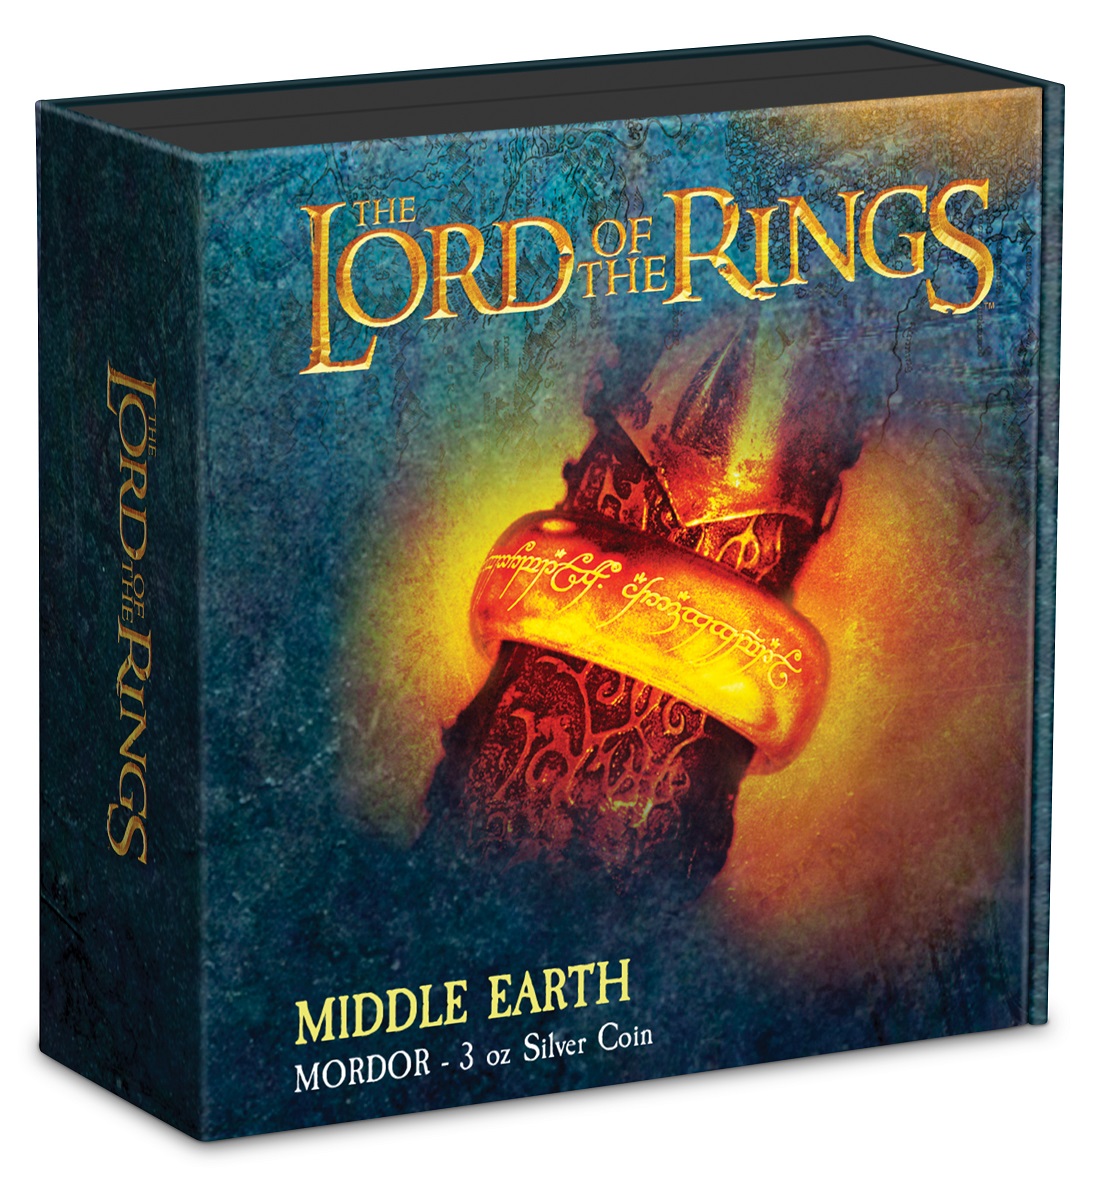 The Lord of the Rings - Gate of Mordor Sam - TTT Trilogy